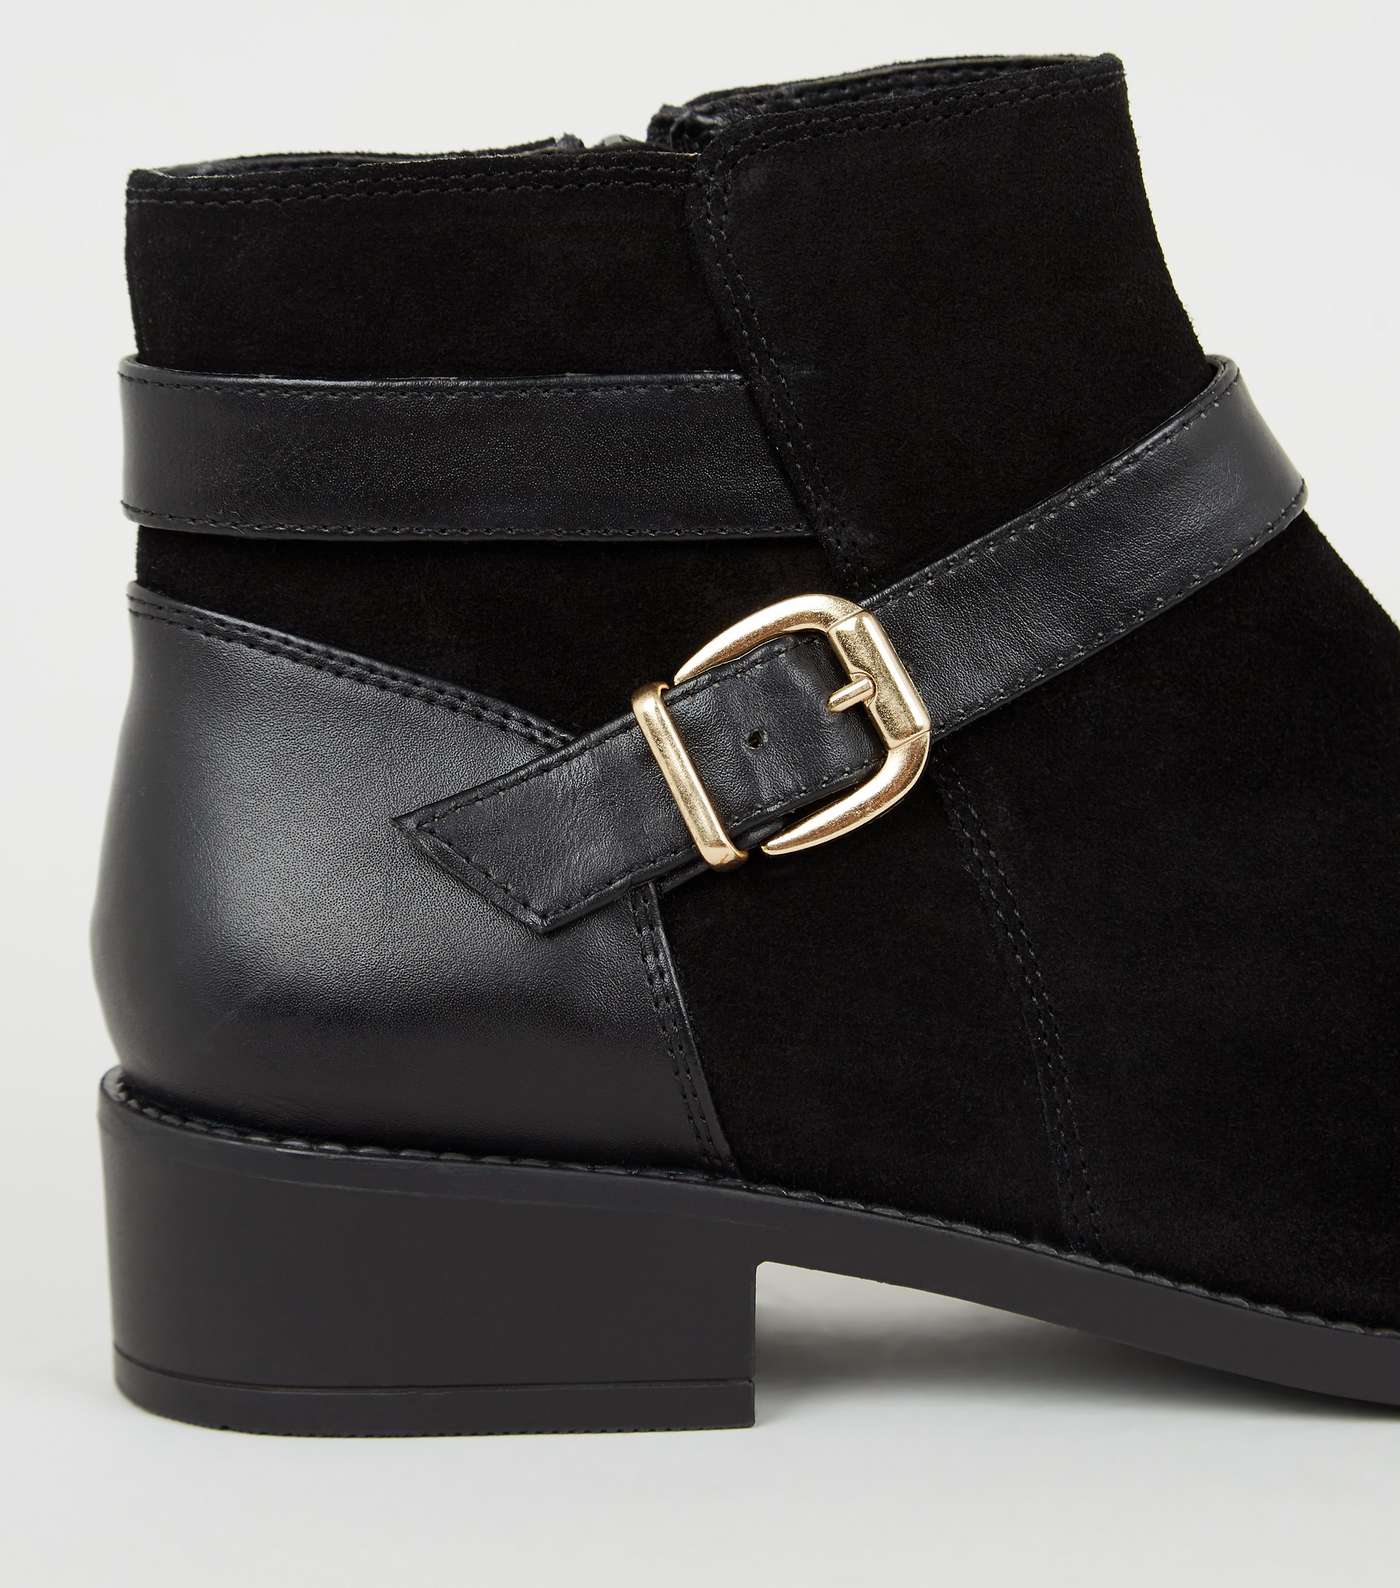 Wide Fit Black Suede Buckle Strap Boots Image 4